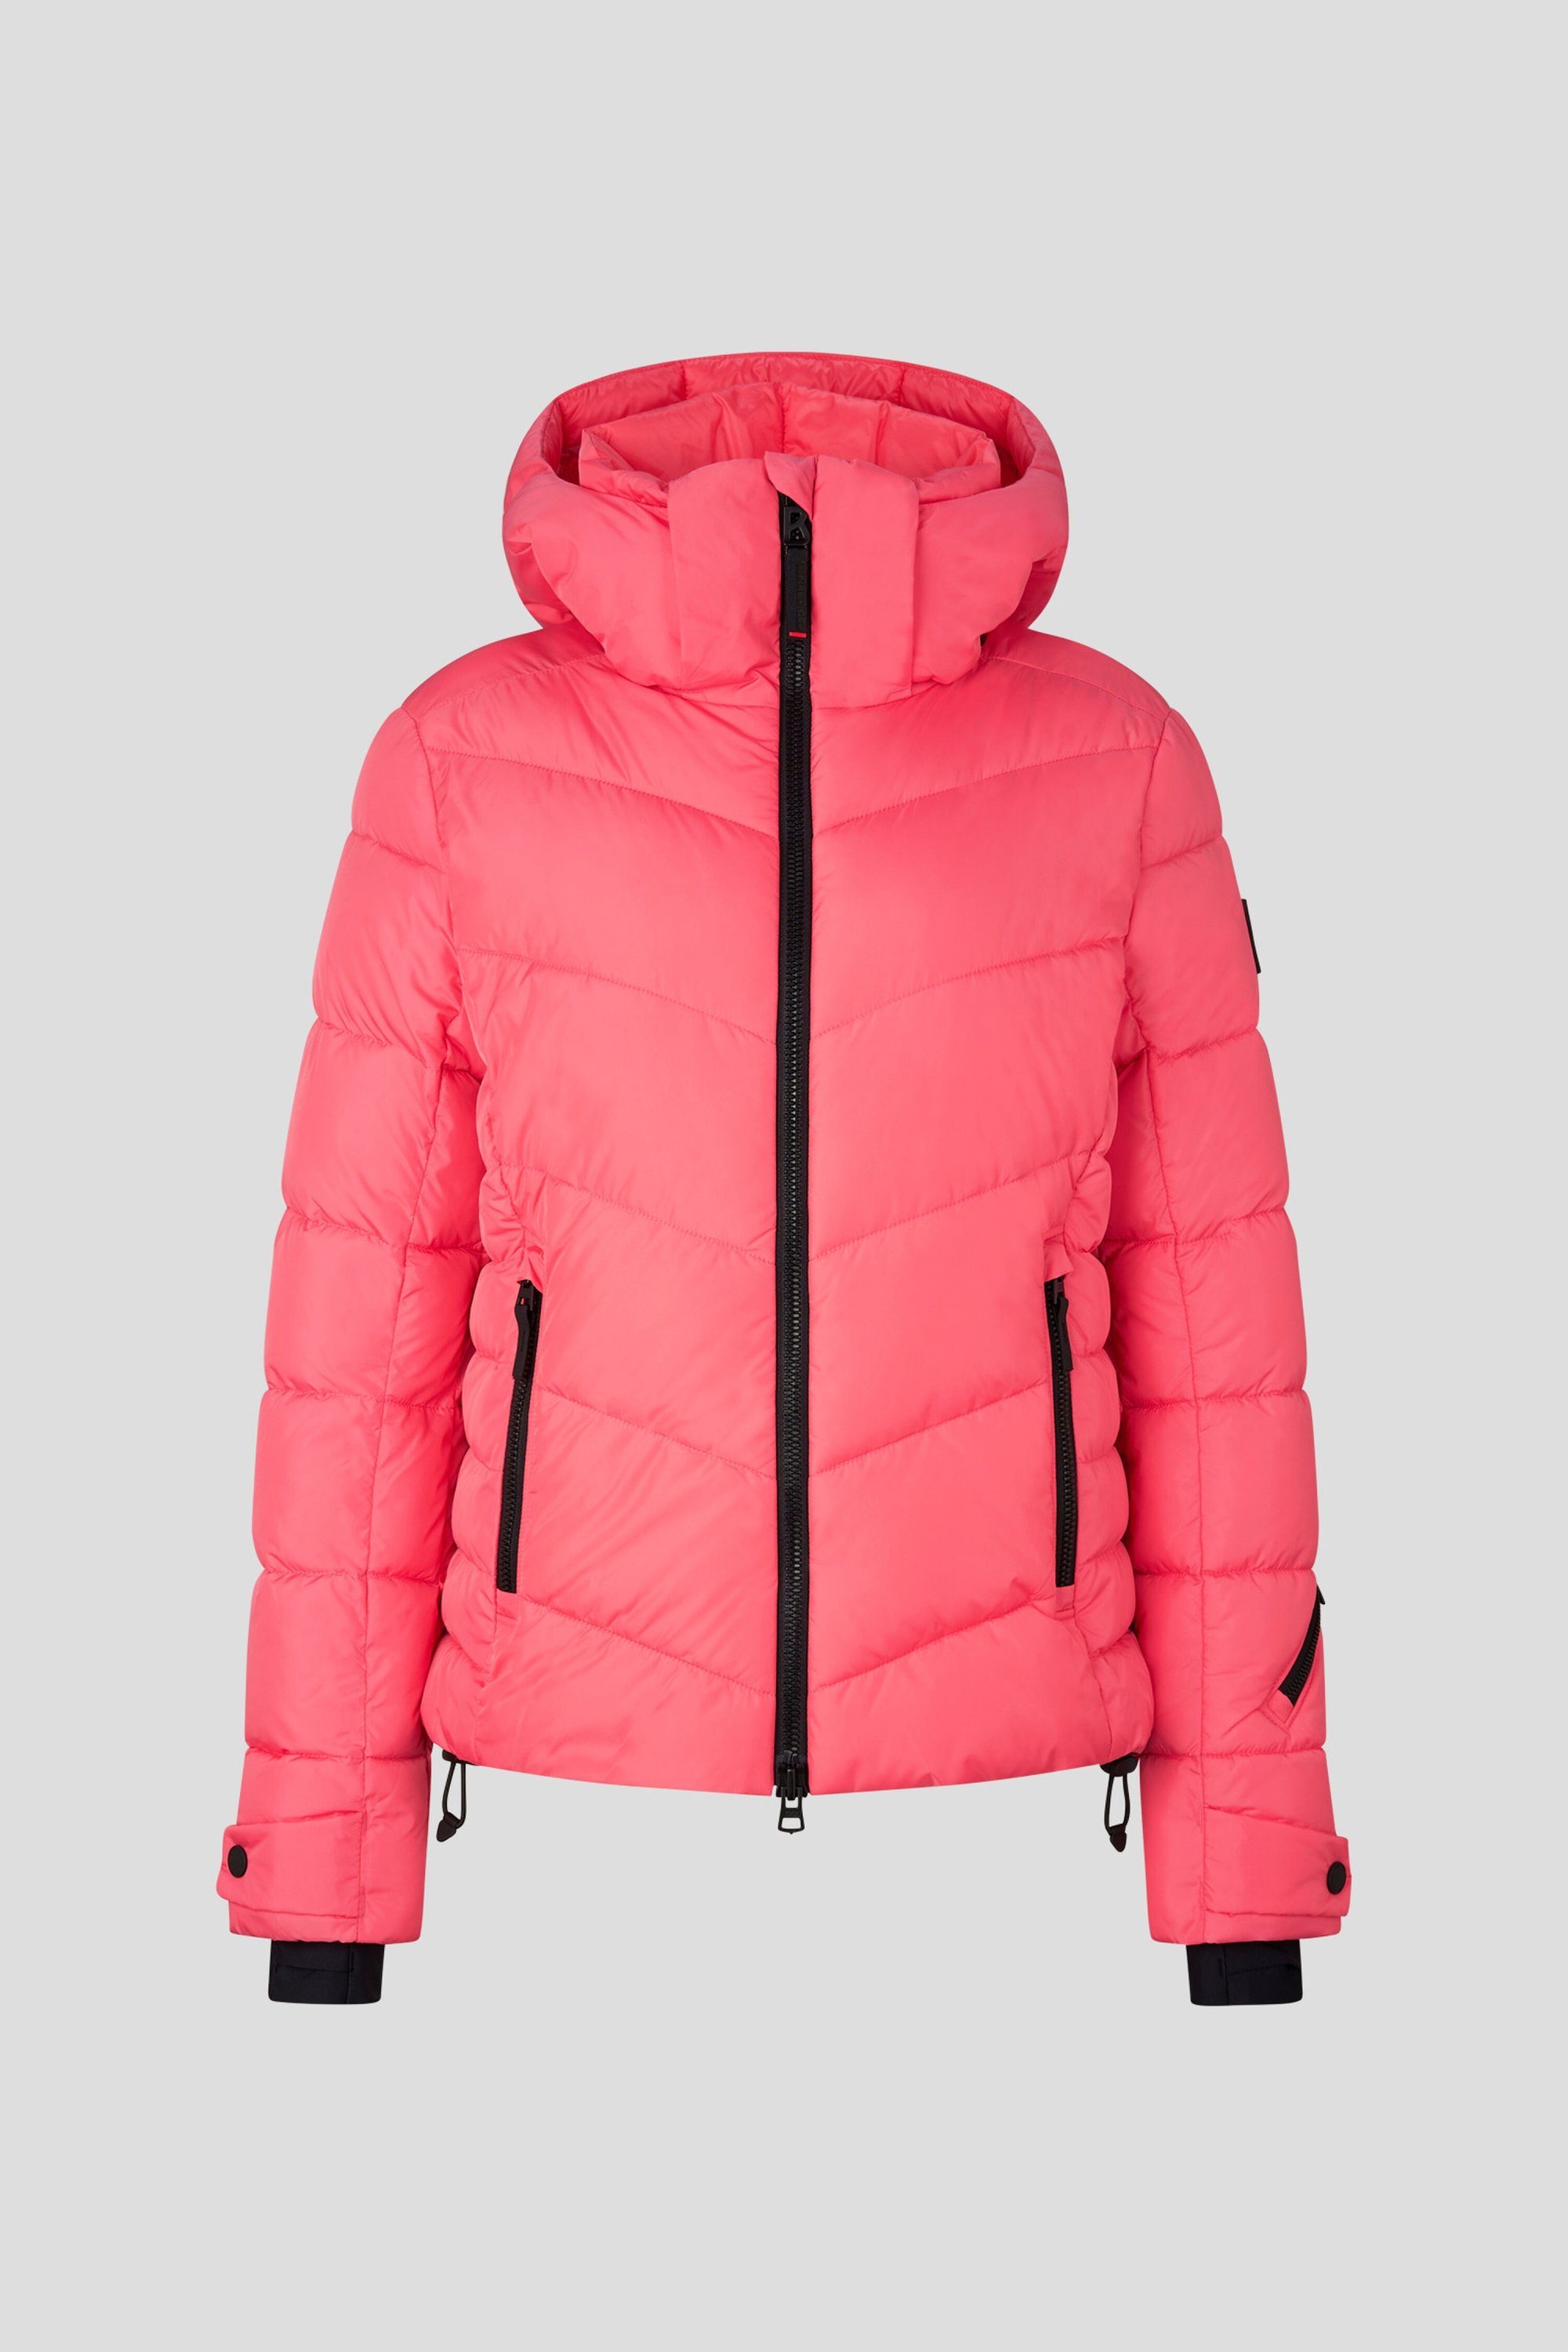 Bogner Fire + Ice Kapuzensweatjacke pink SAELLY2 coral